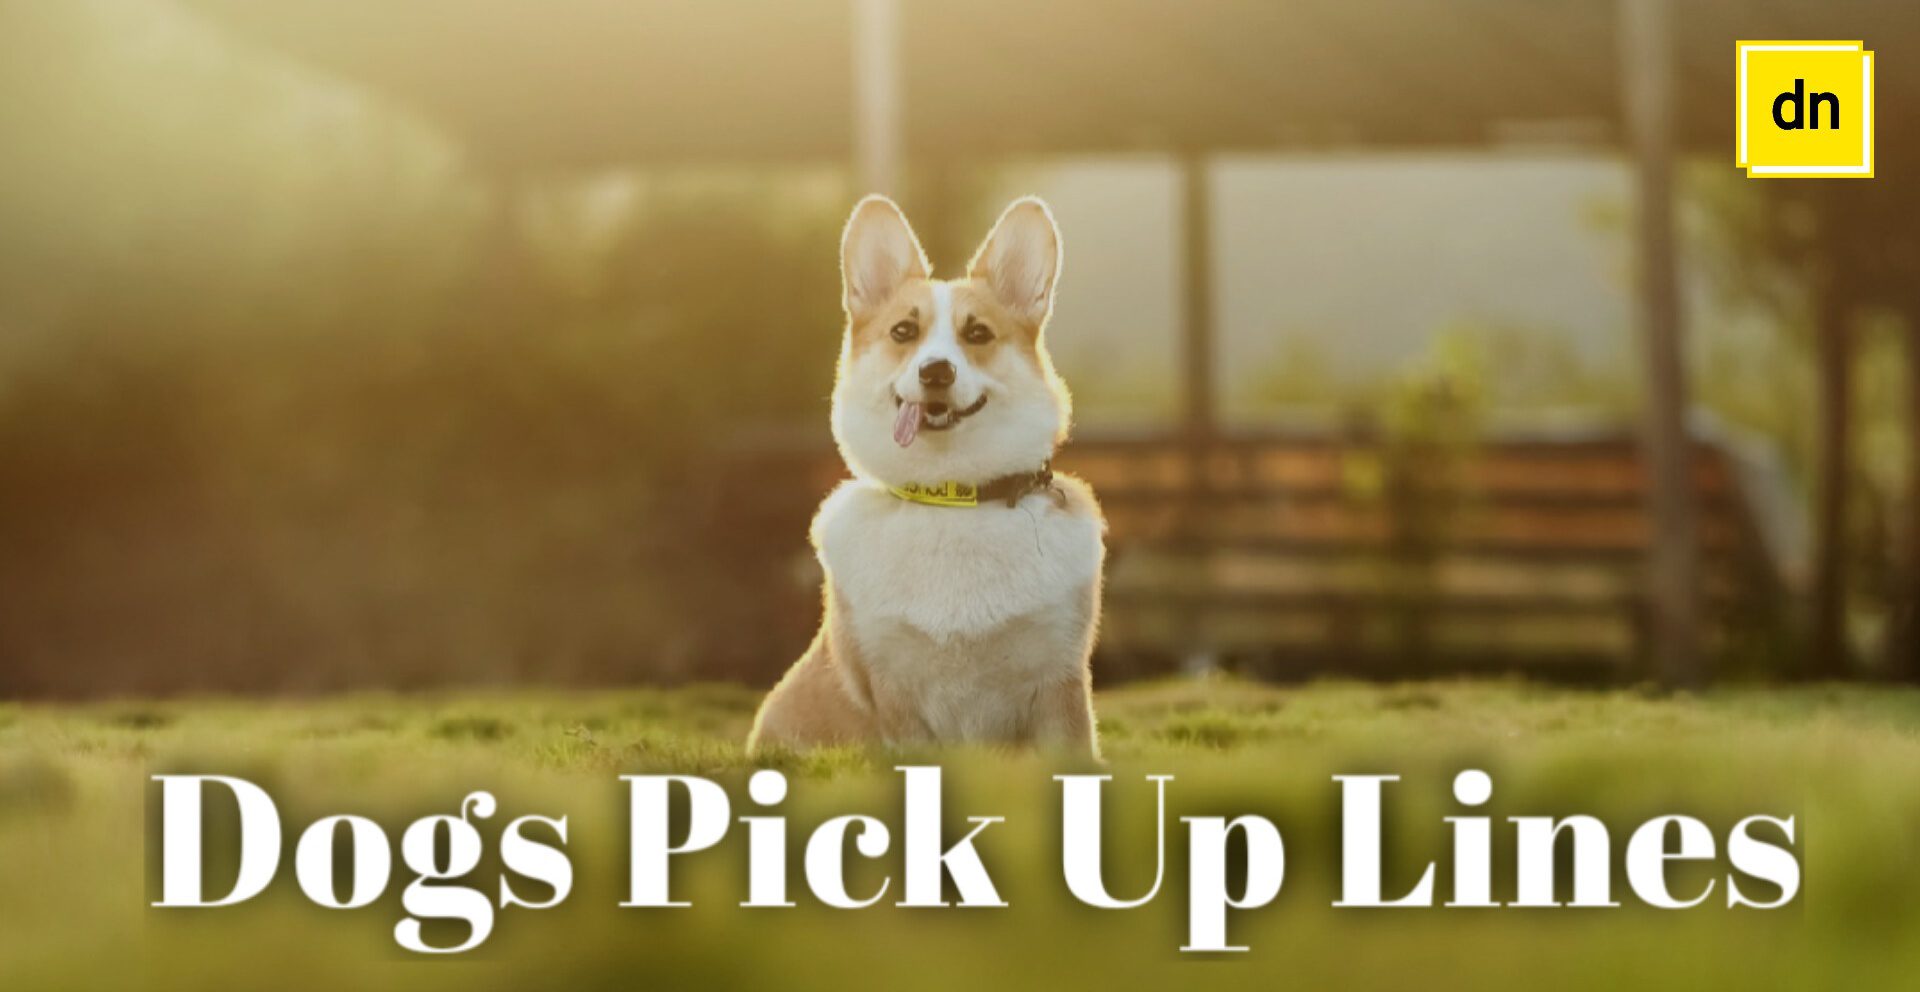 Dogs pick up lines